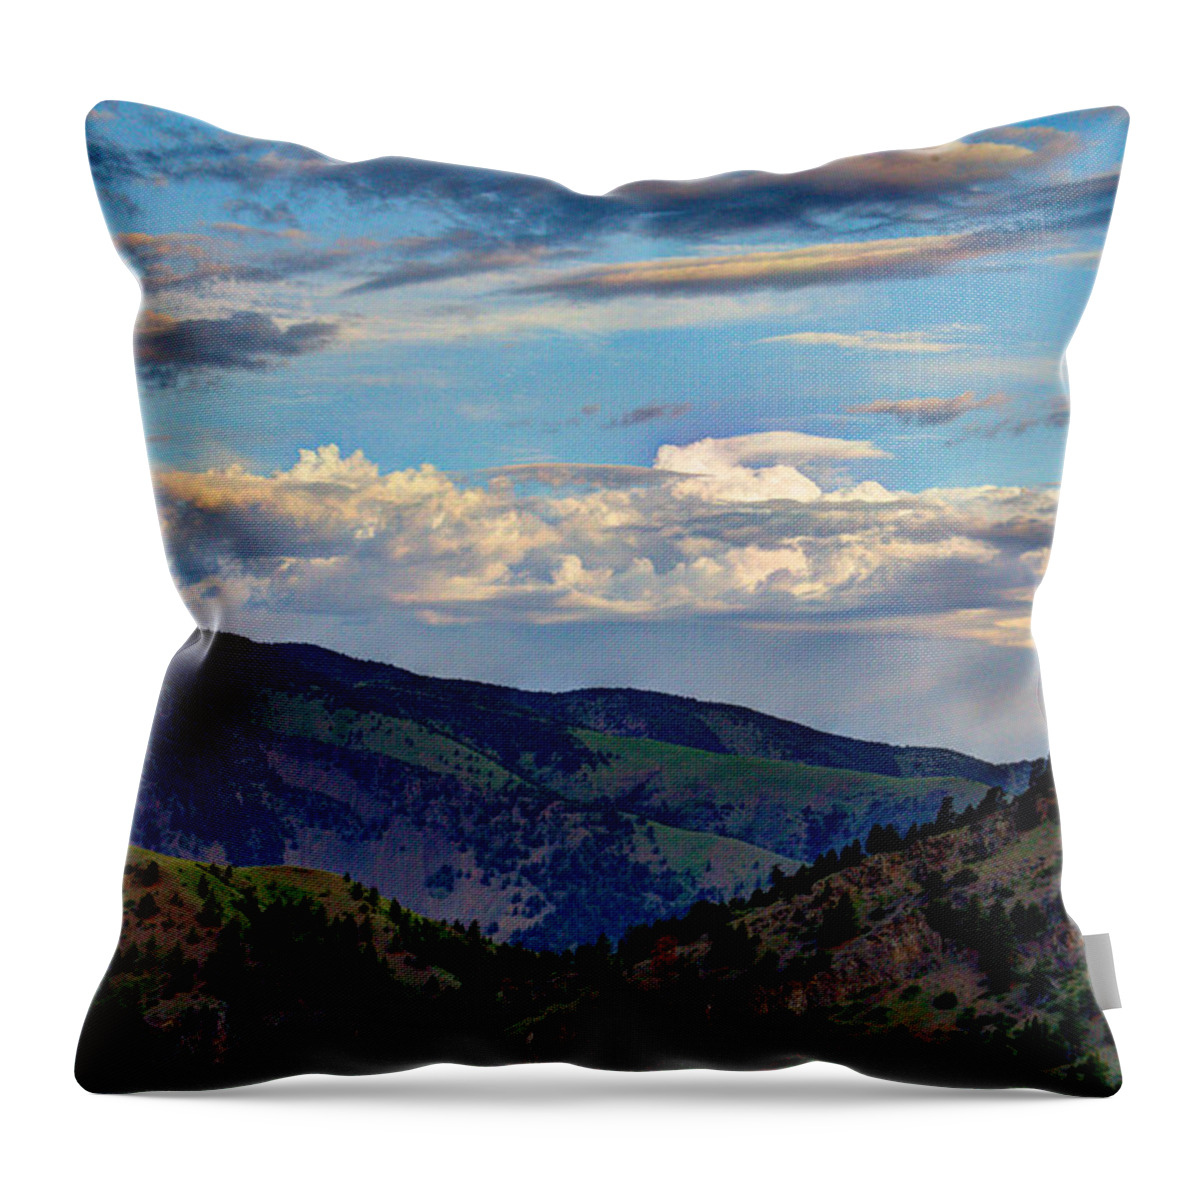 Hazy Throw Pillow featuring the photograph Haze Overlooking Holter by John Lee